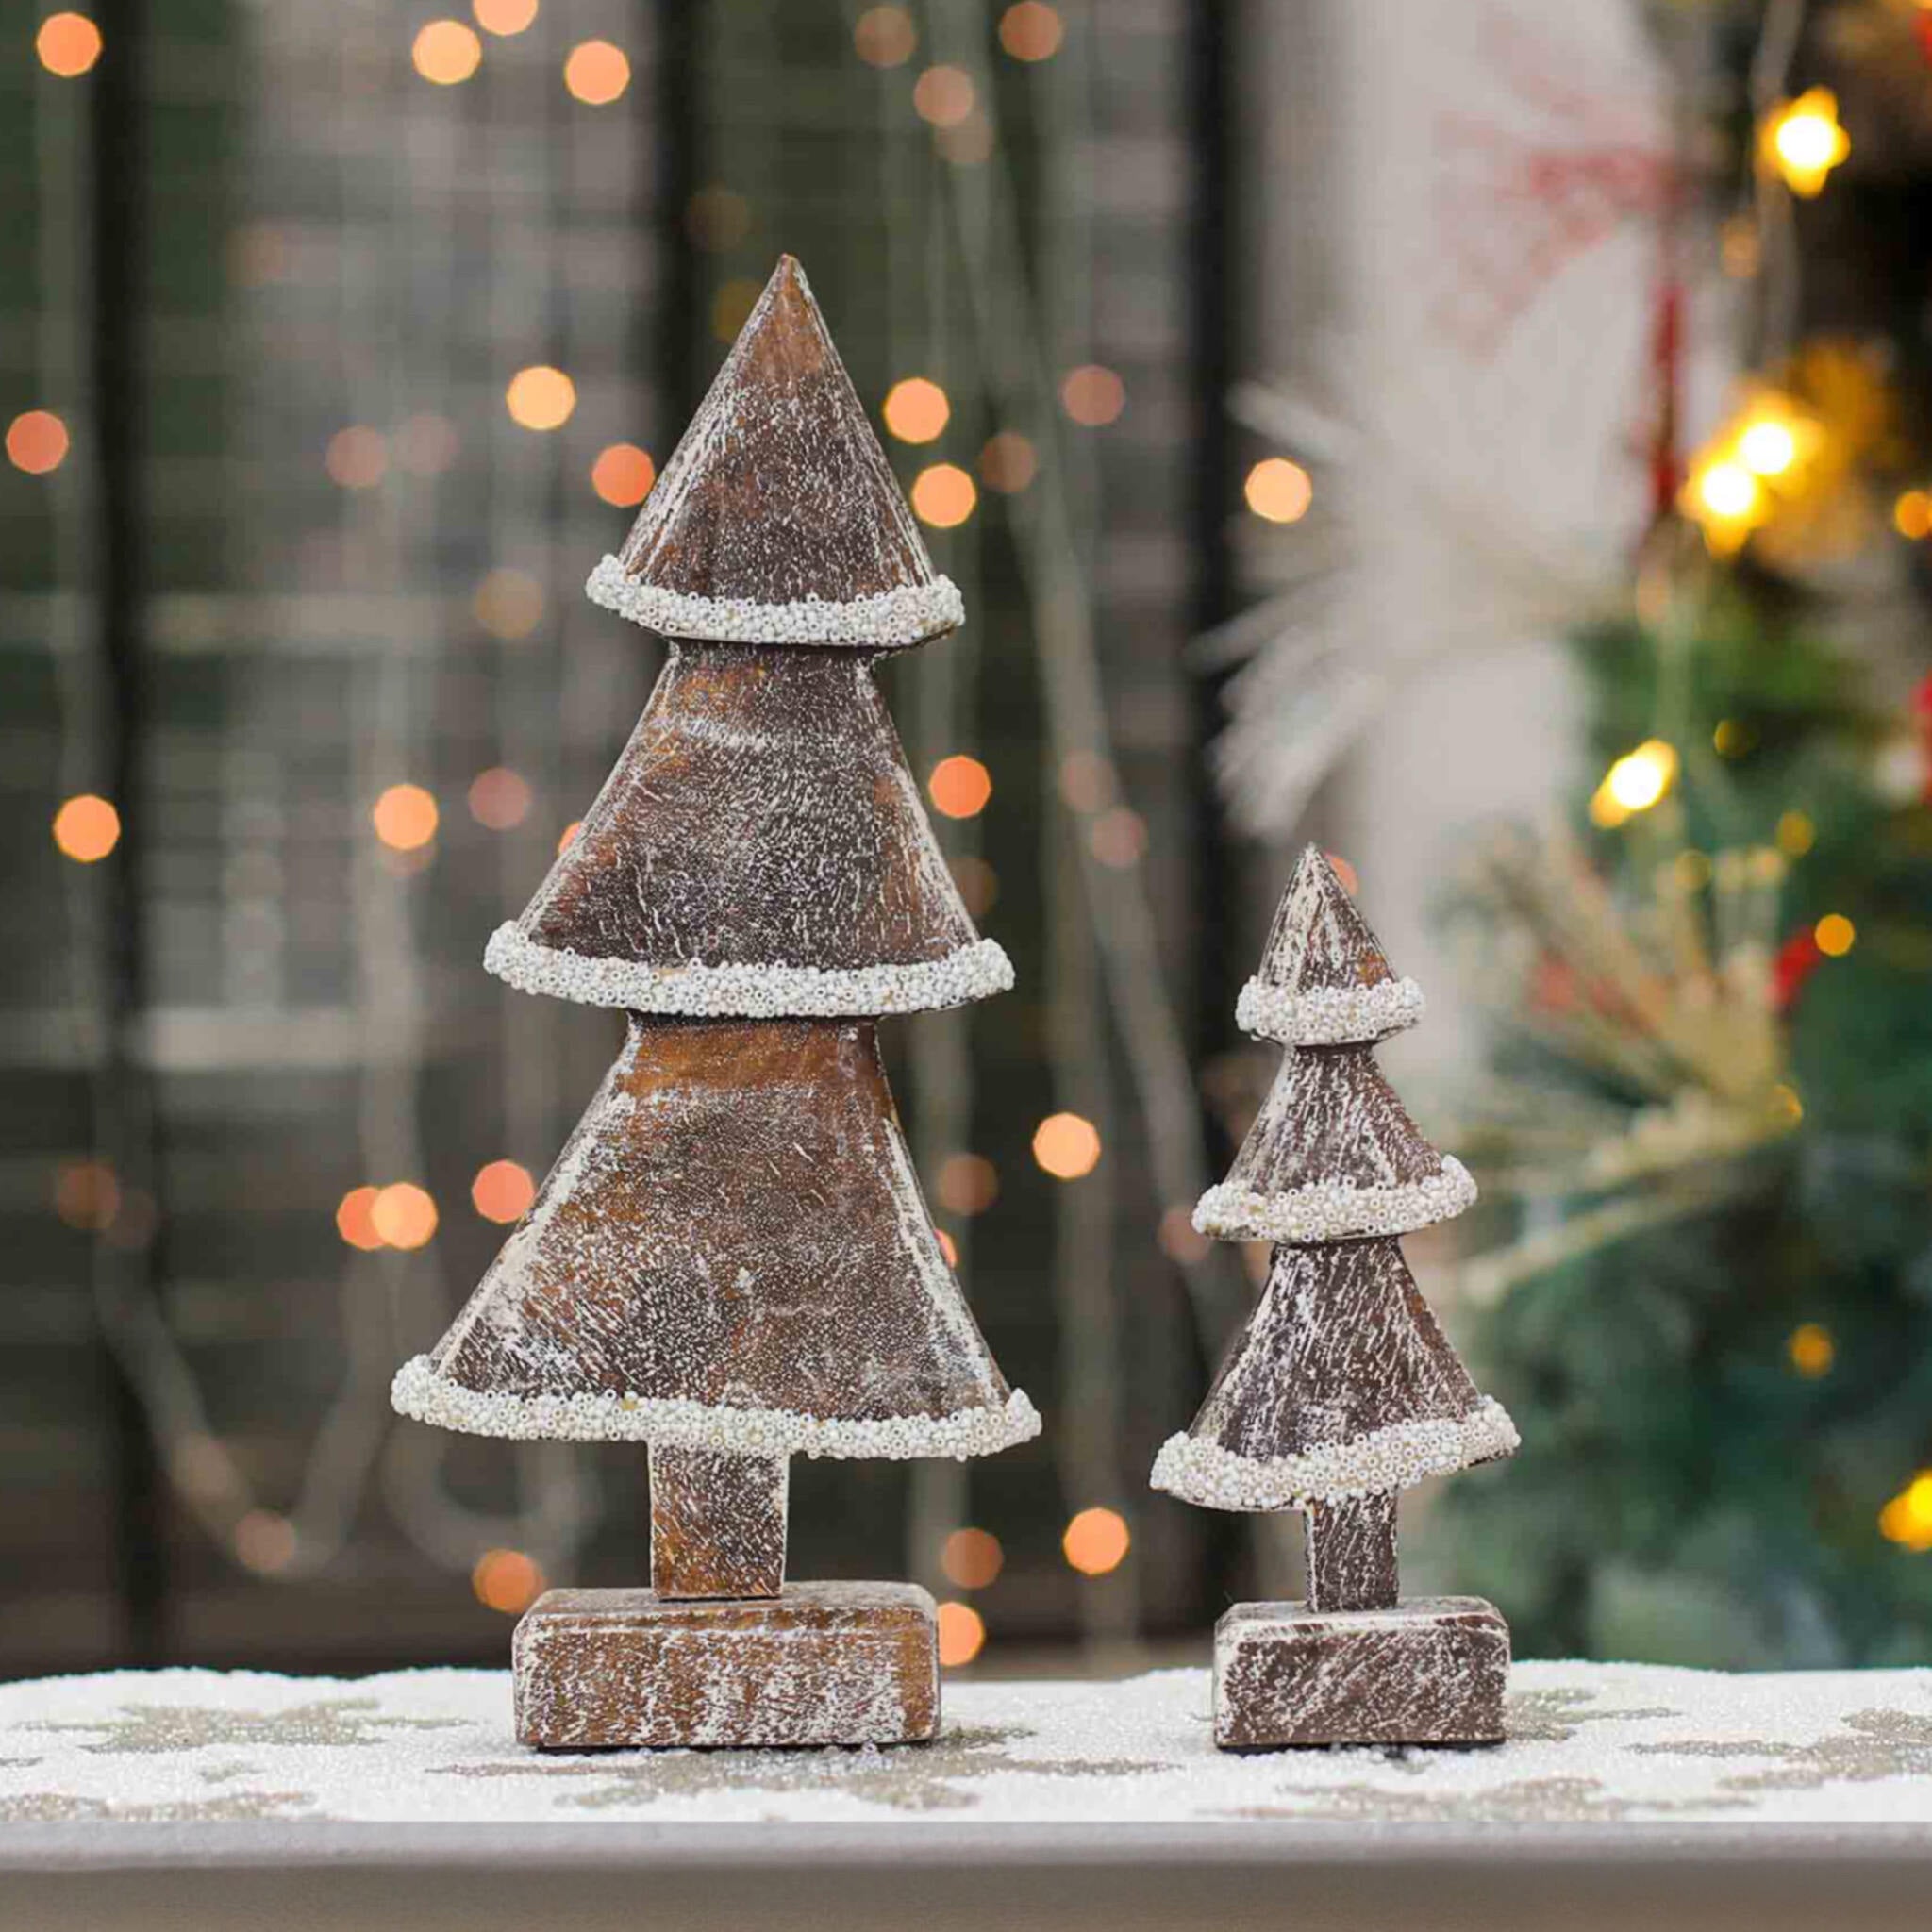 Alpine Christmas Tree Duo in White & Natural, Set of 2